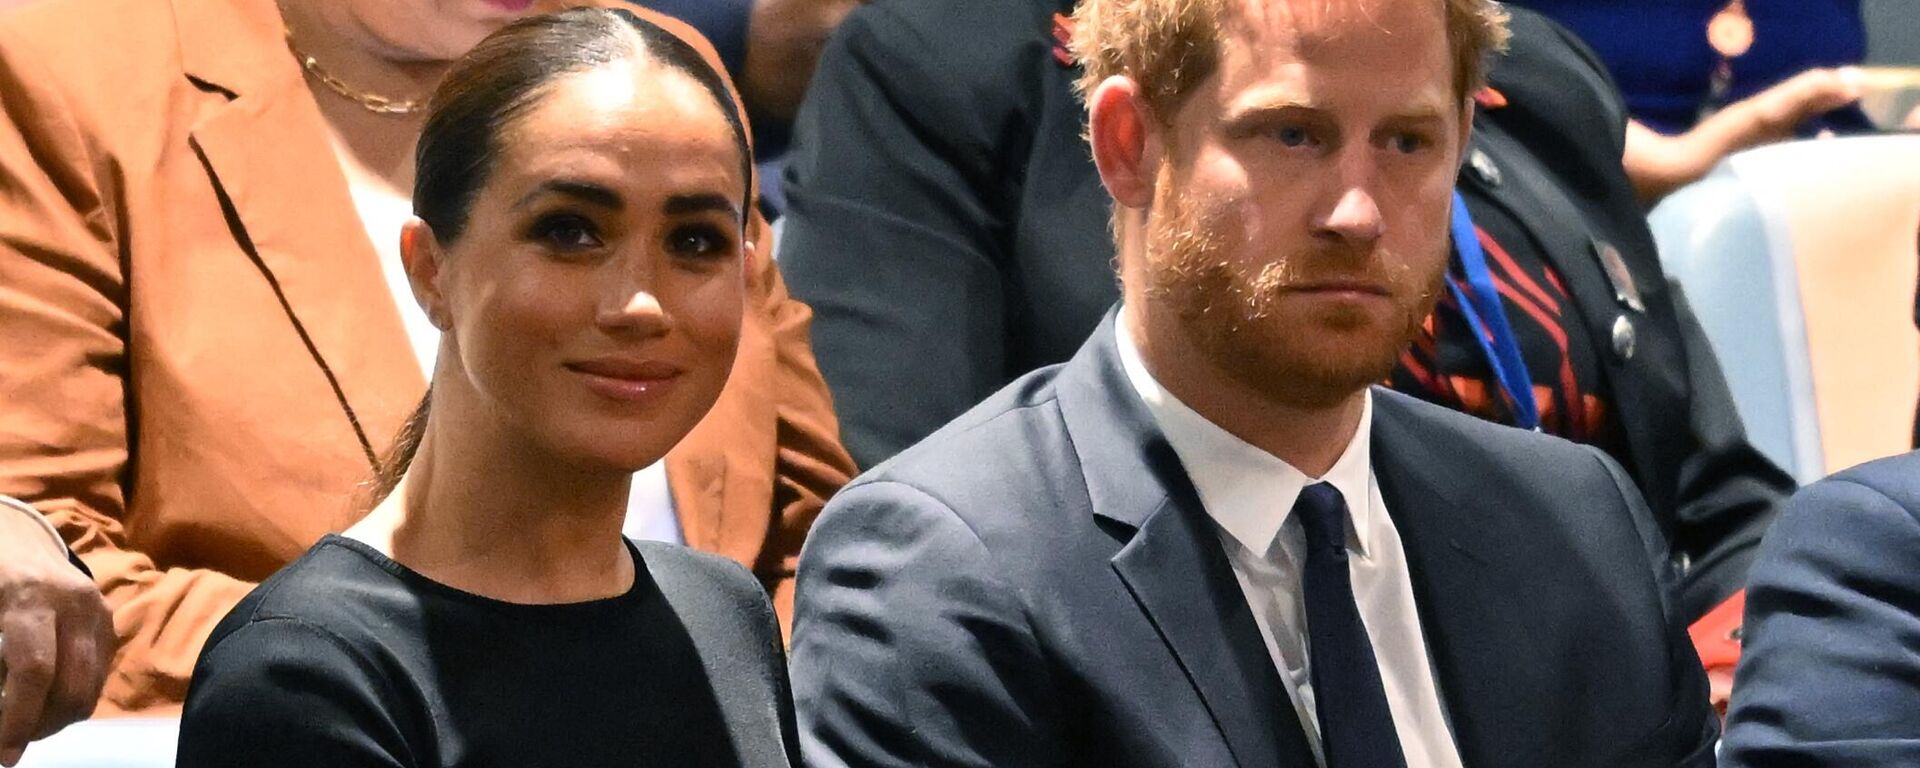 Prince Harry (R) and Meghan Markle (L), the Duke and Duchess of Sussex, attend the 2020 UN Nelson Mandela Prize award ceremony at the United Nations in New York on July 18, 2022 - Sputnik International, 1920, 20.12.2022